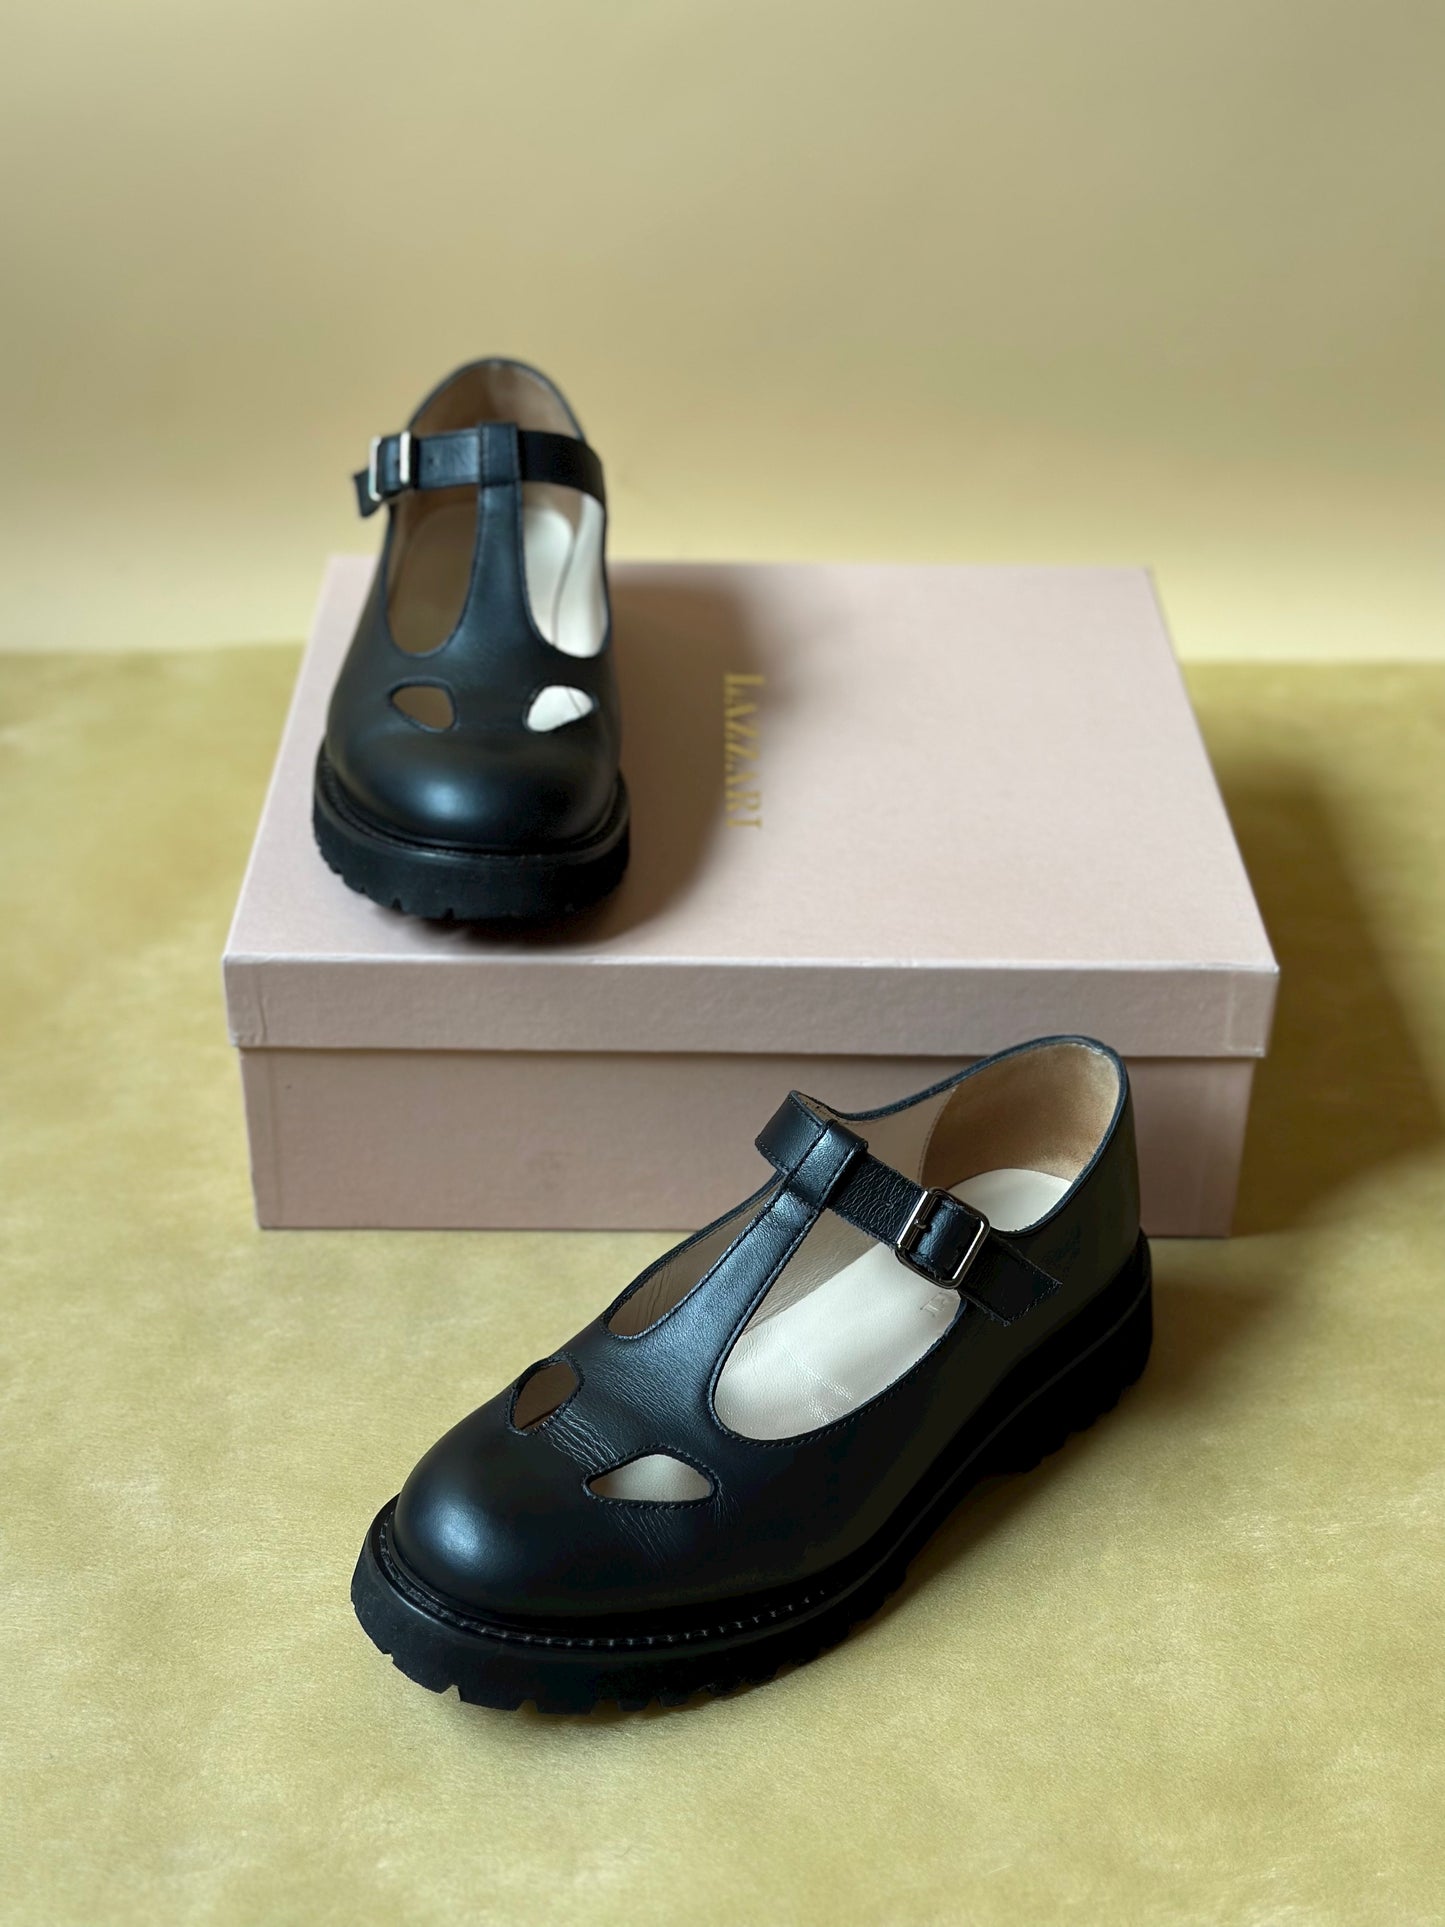 Real Leather Black Mary Janes Lazzari